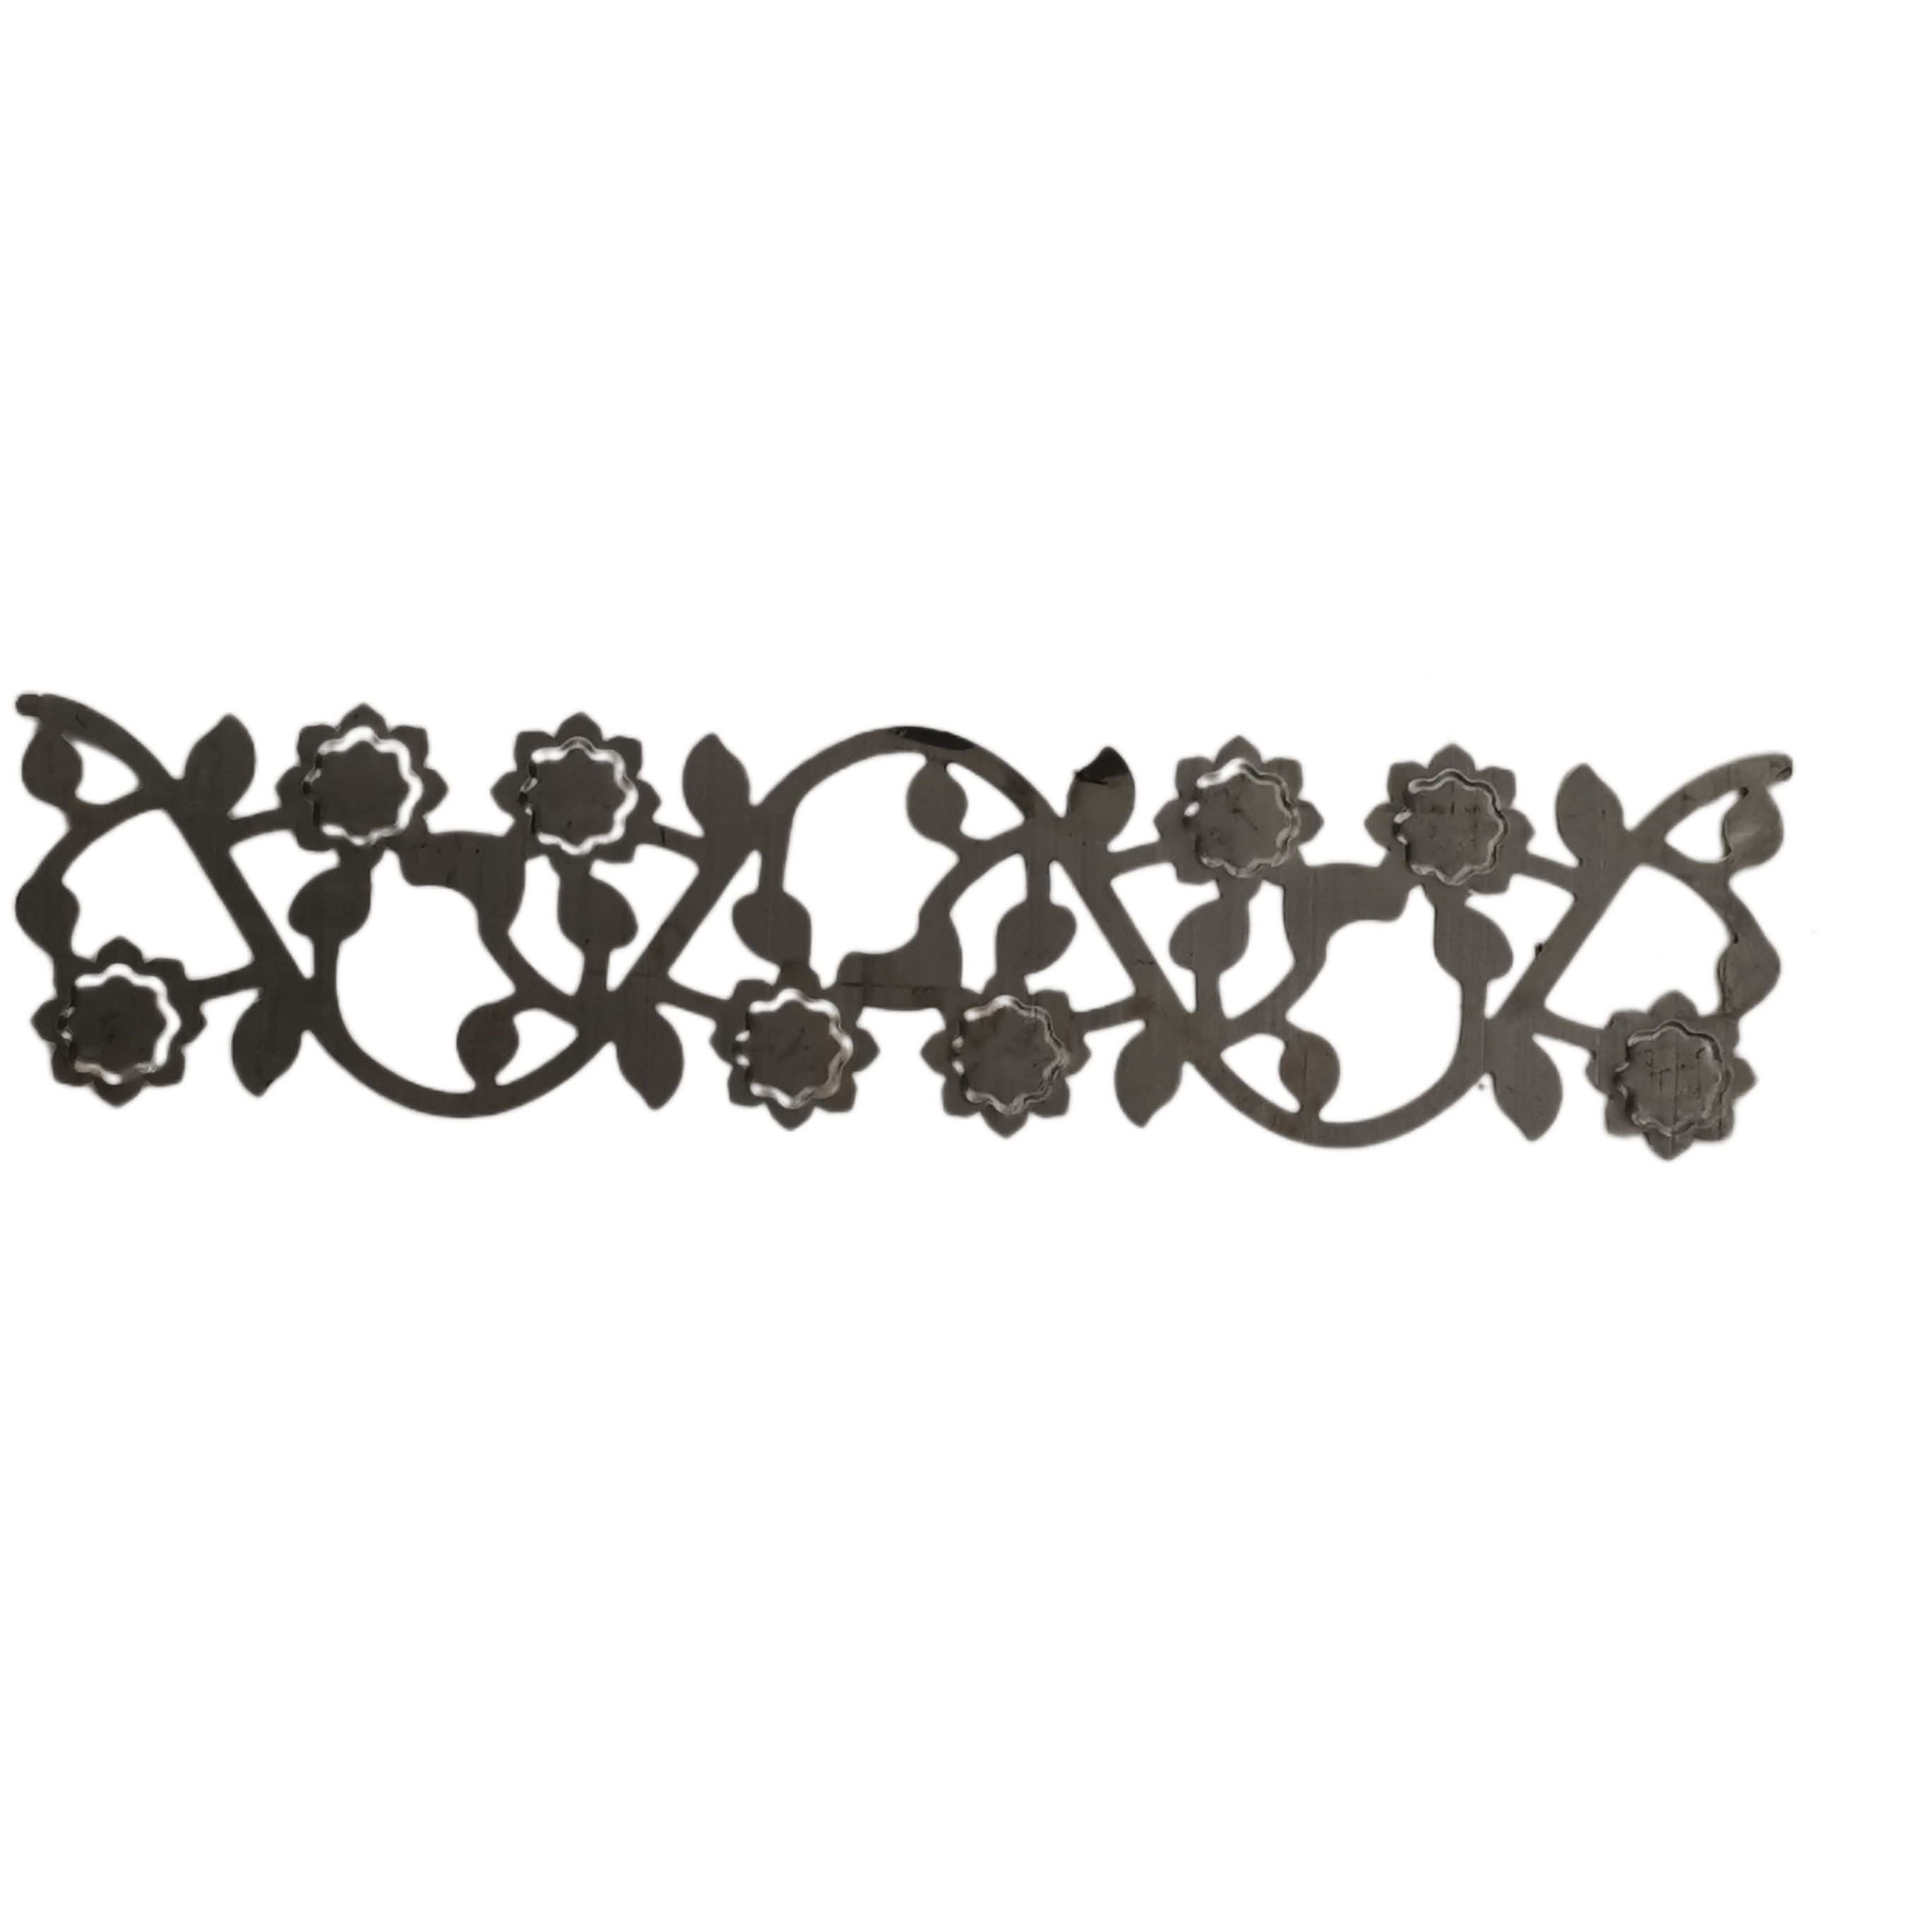 DECORATIVE WROUGHT IRON STAMPING/CODE:9091